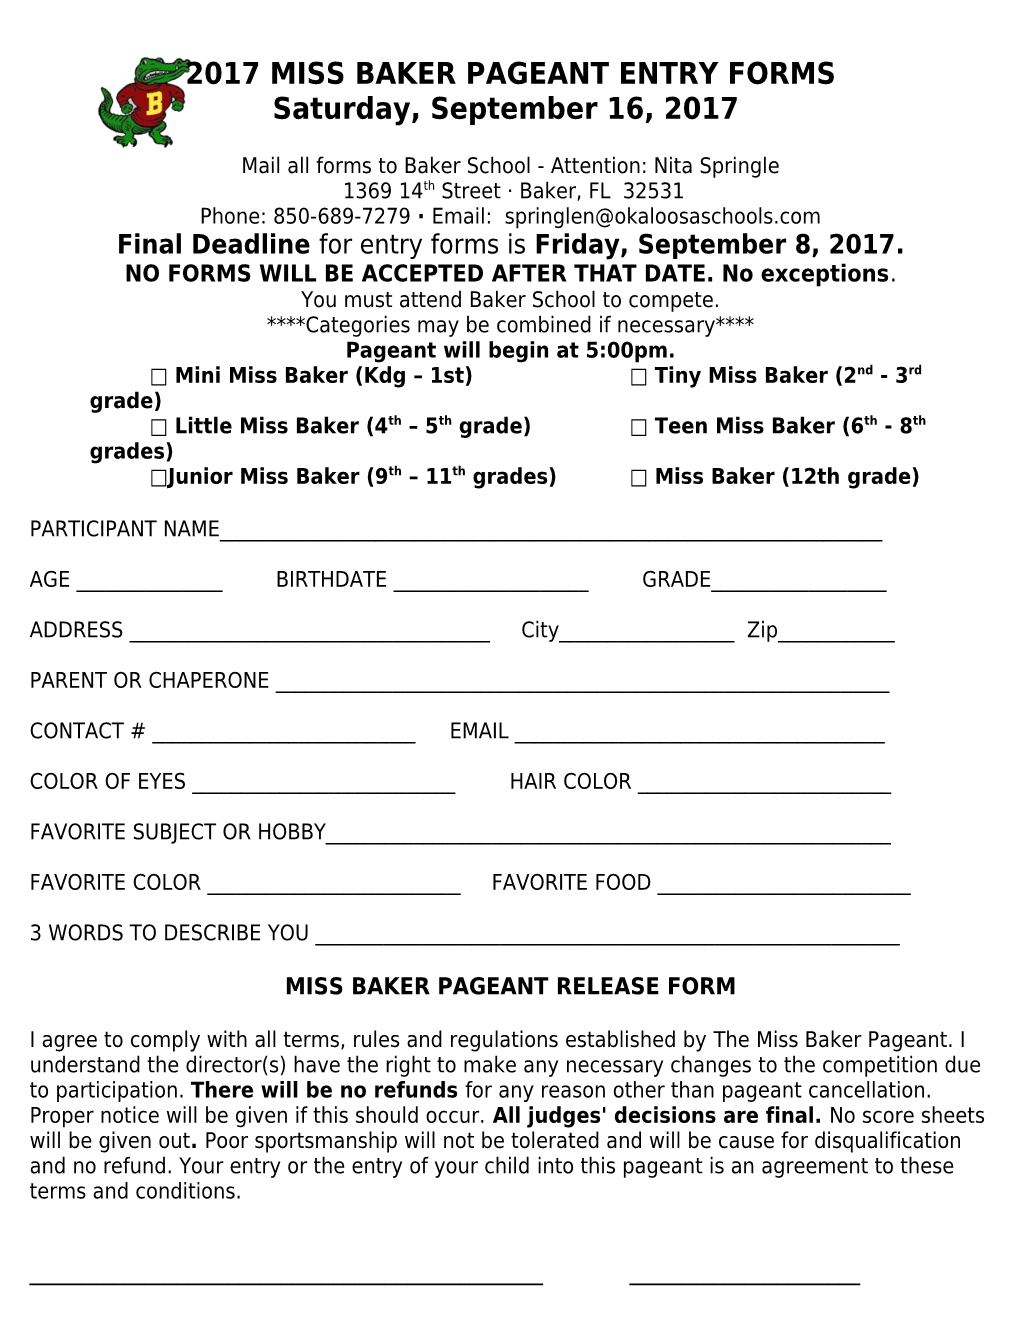 2017Miss Baker Pageant Entry Forms